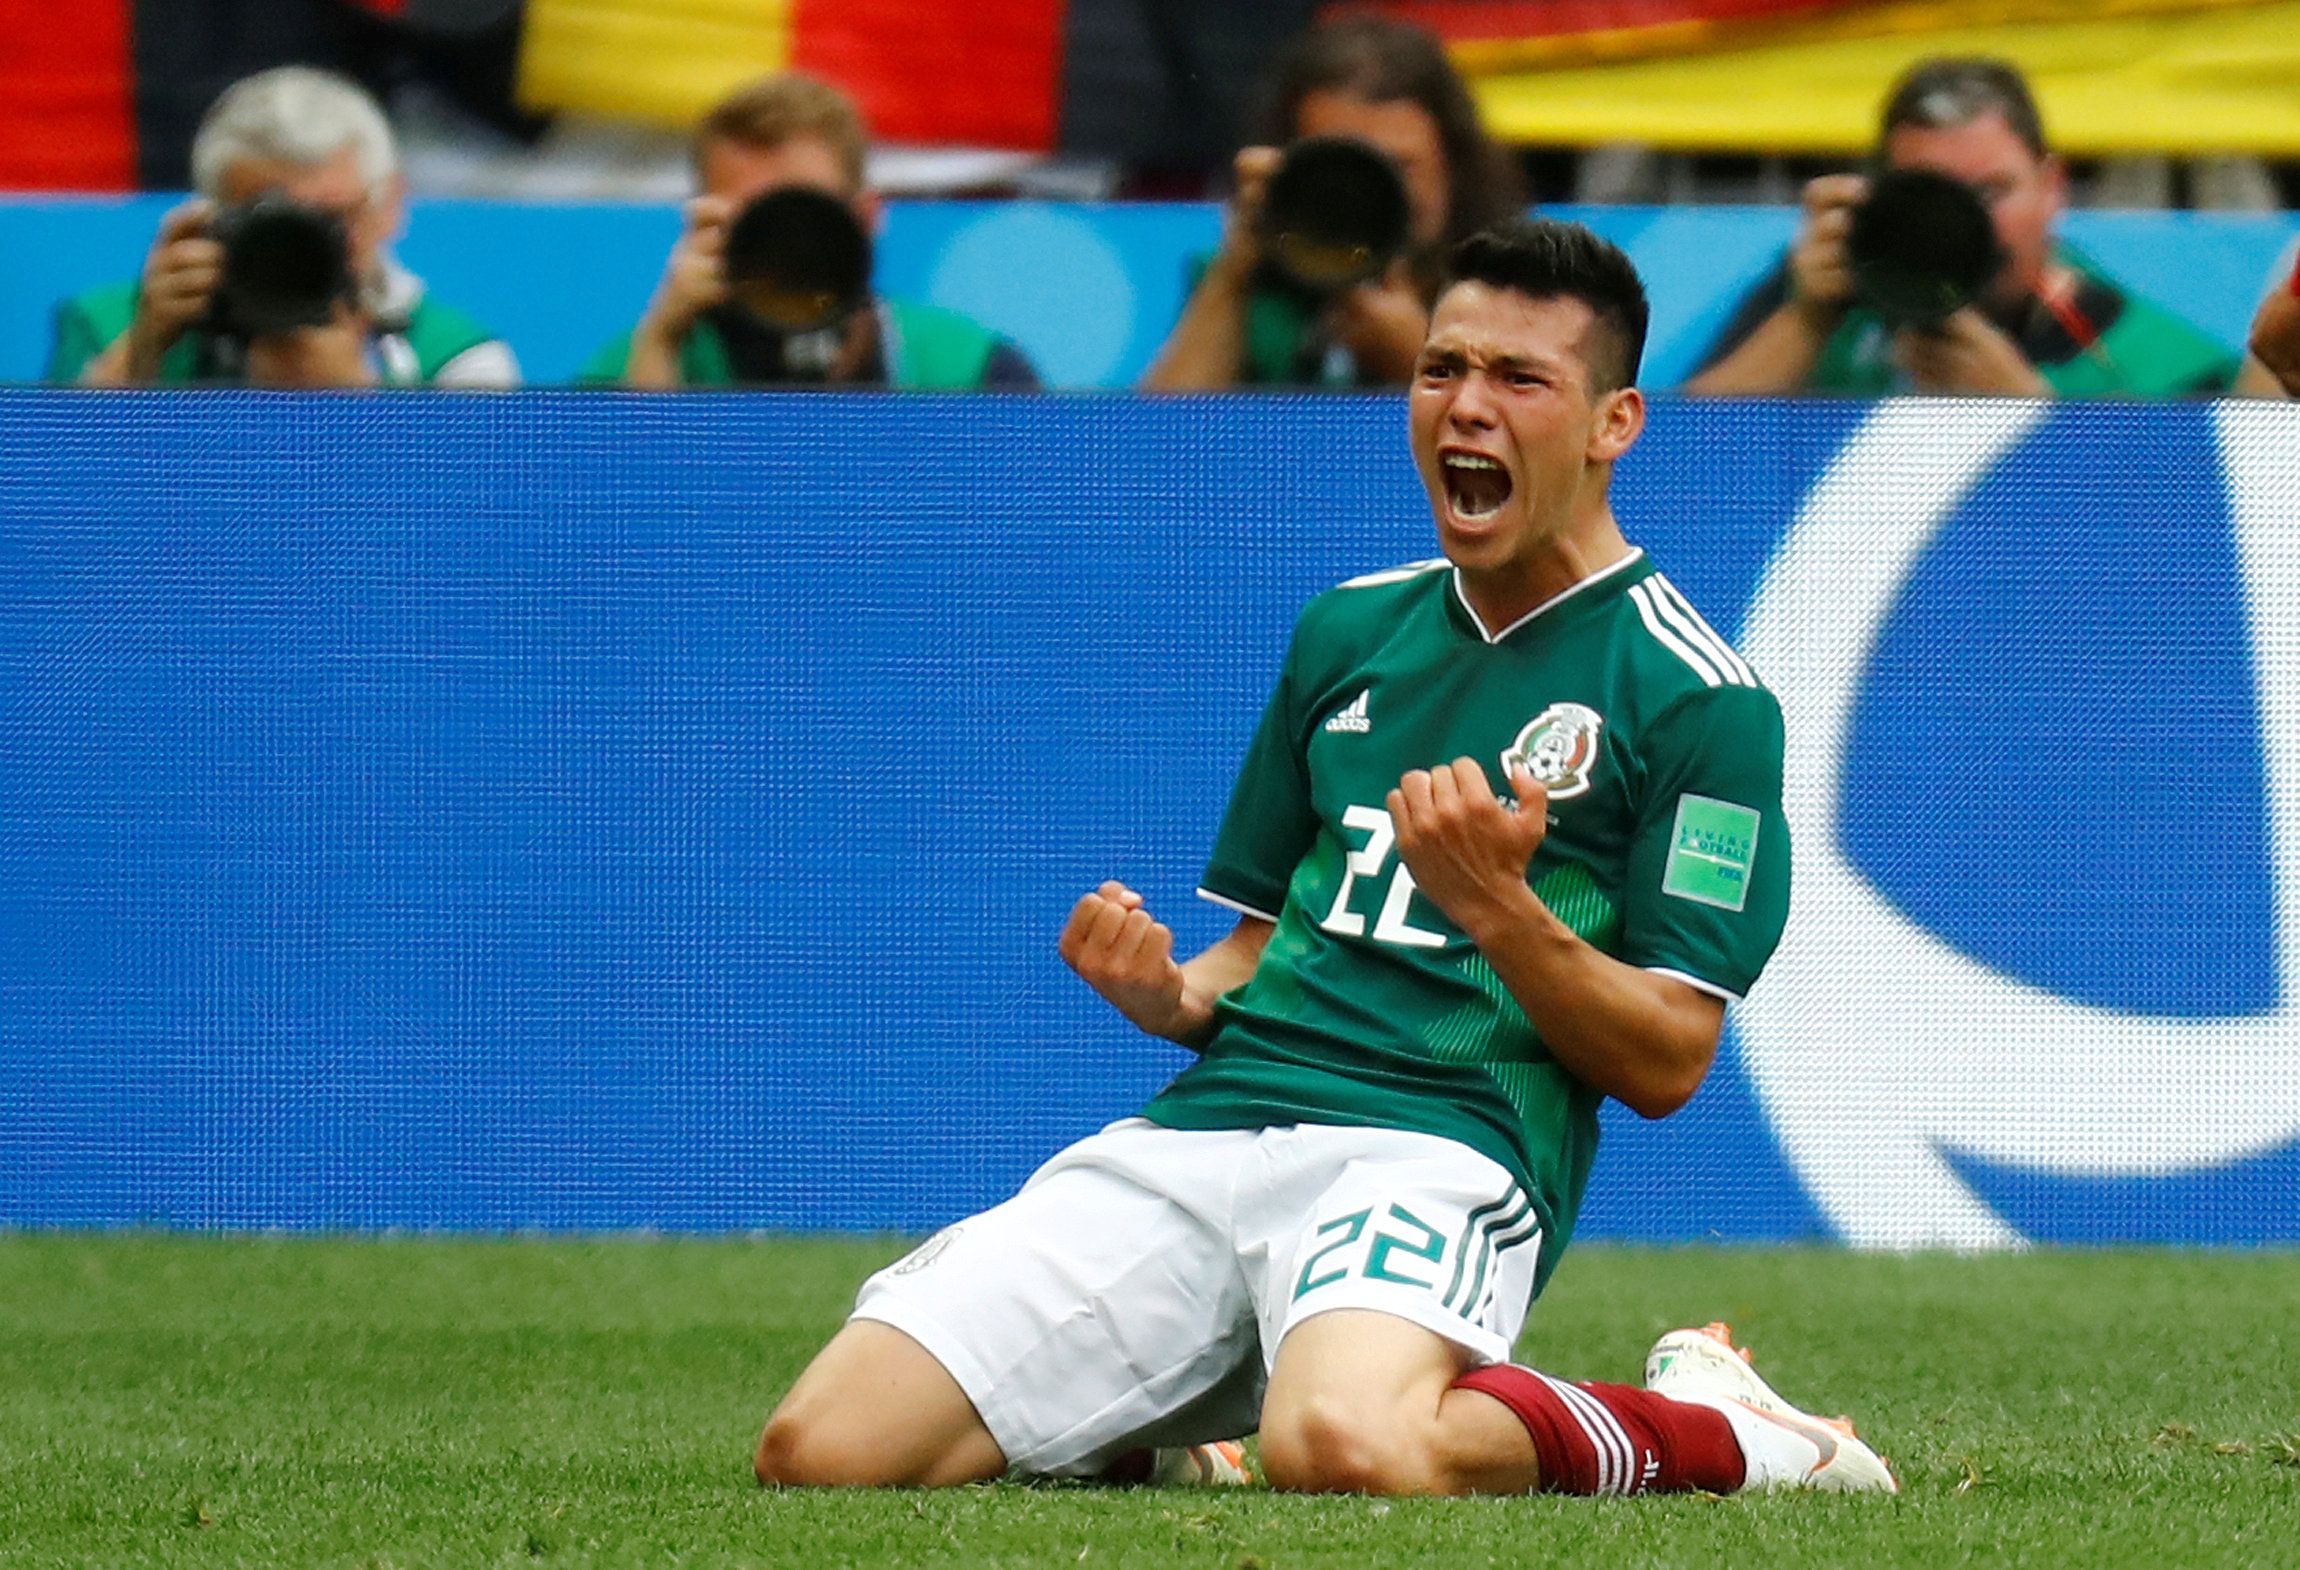 Soccer Football - World Cup - Group F - Germany vs Mexico - Luzhniki Stadium, Moscow, Russia - June 17, 2018   Mexico's Hirving Lozano celebrates scoring their first goal            REUTERS/Kai Pfaffenbach     TPX IMAGES OF THE DAY